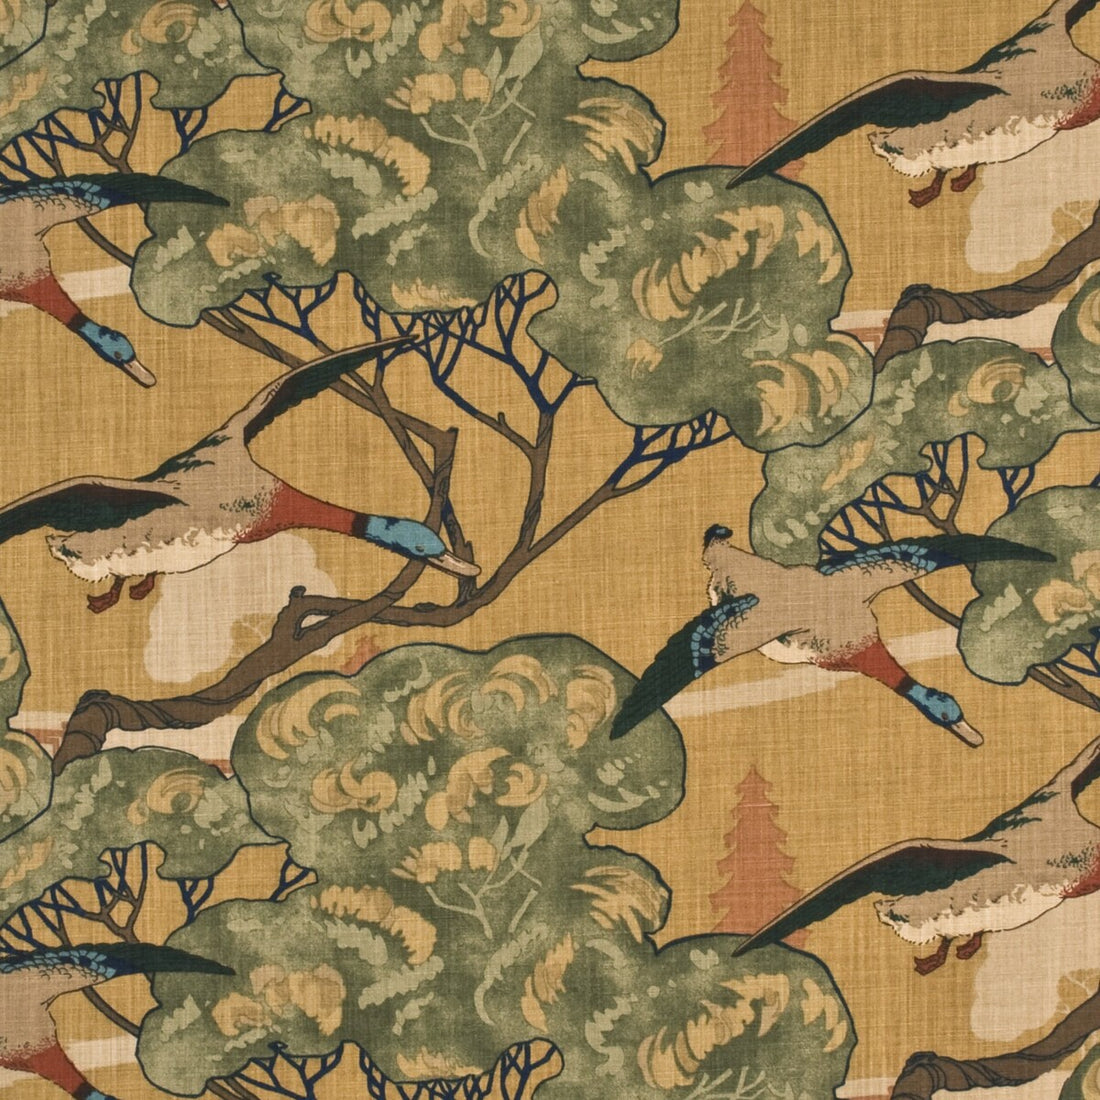 Flying Ducks fabric in sand color - pattern FD205.N102.0 - by Mulberry in the Mulberry Best Of collection